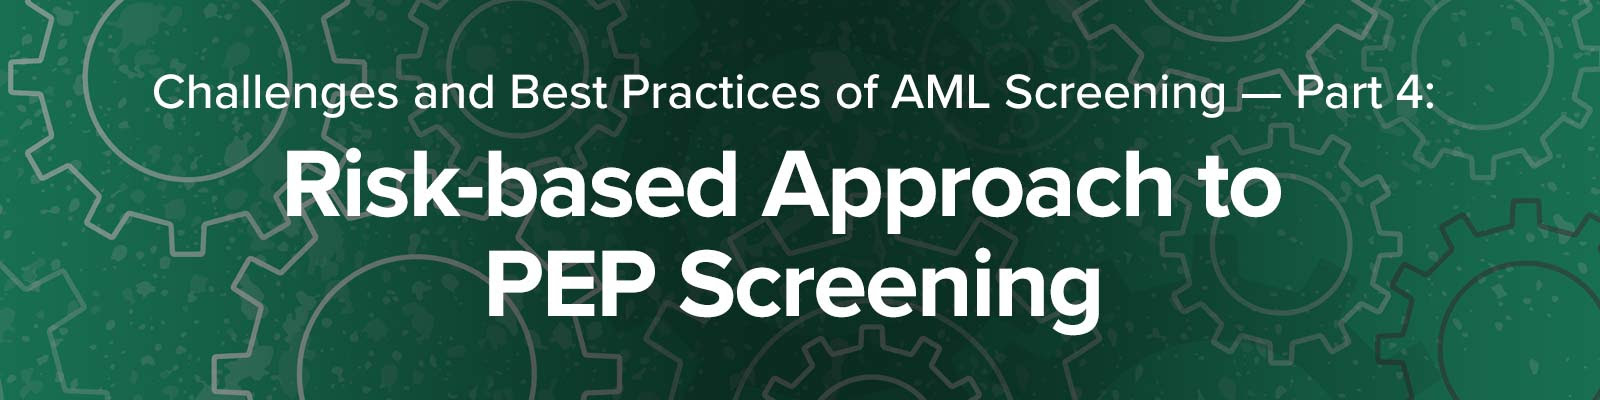 Challenges and Best Practices of PEP & Sanctions Screening Part 4: Risk-based Approach to PEP Screening